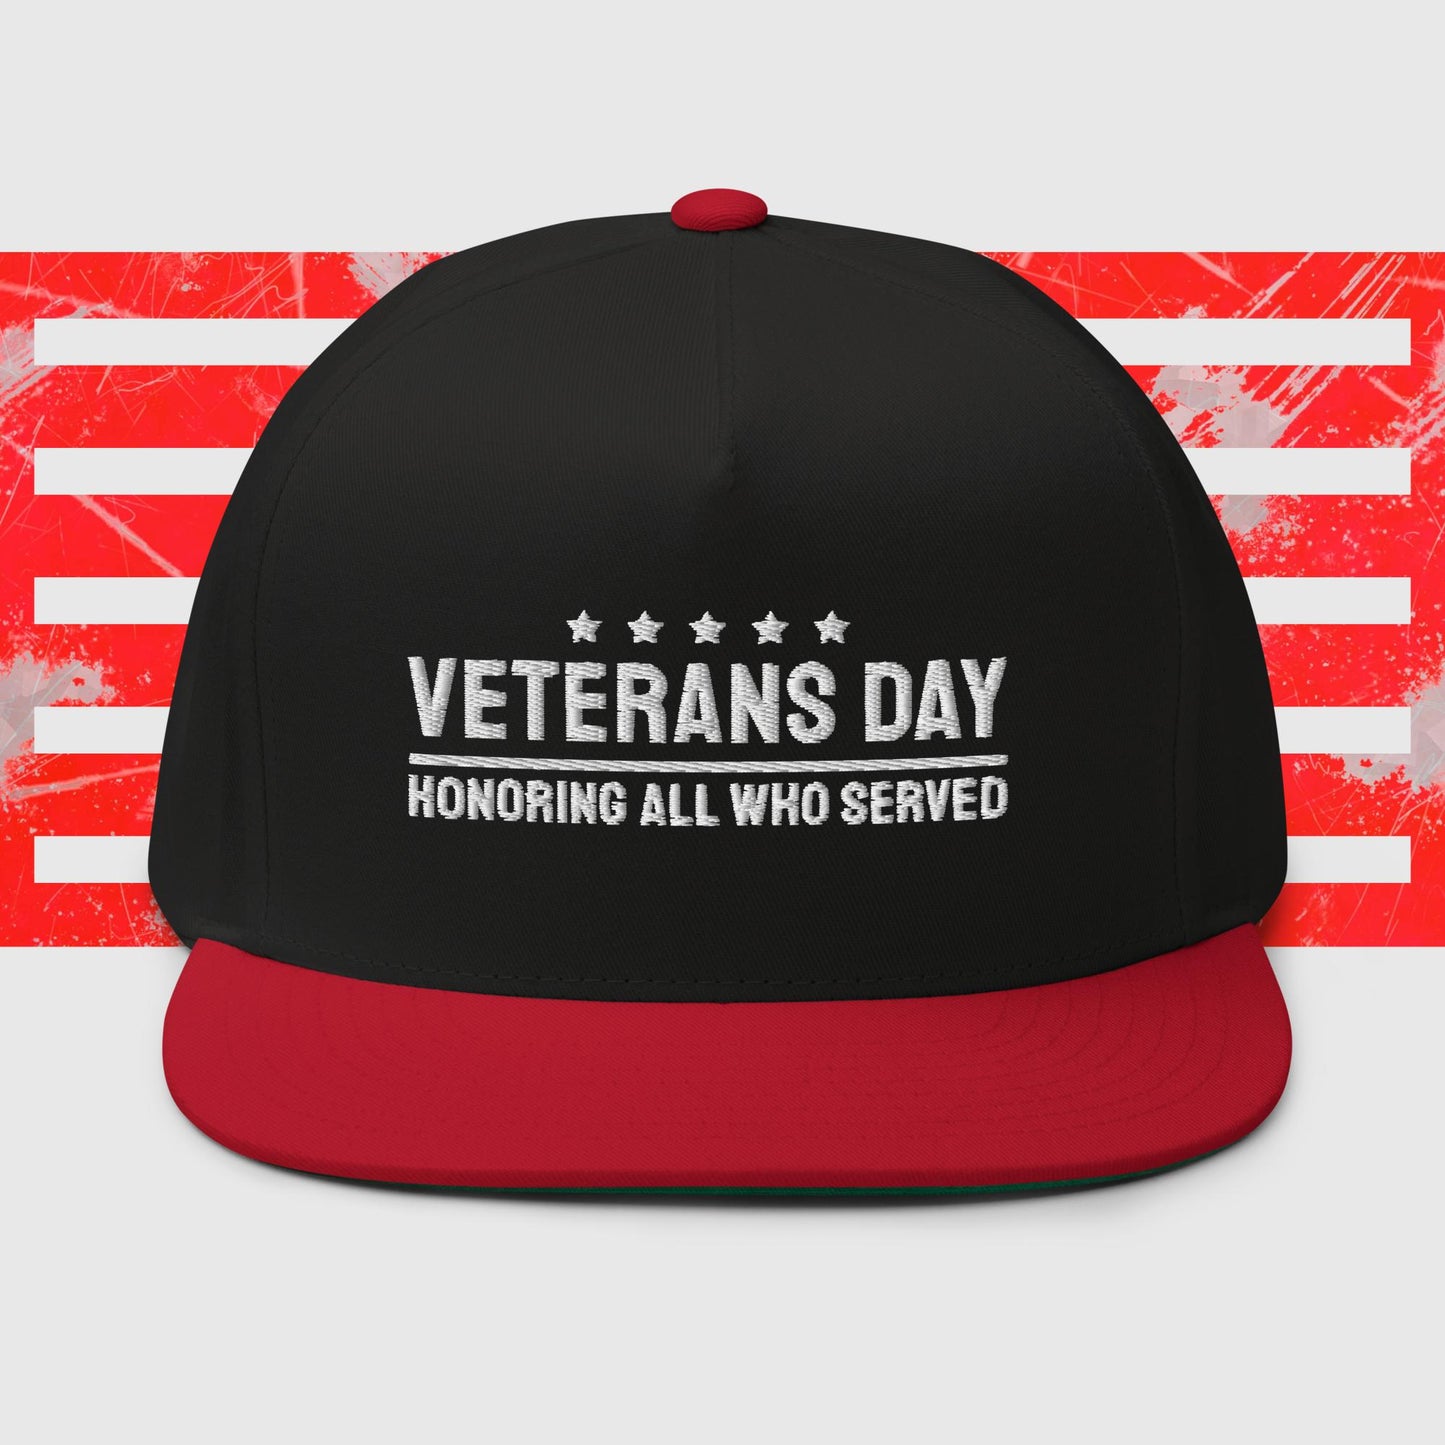 PATRIOTIC CAP VETERANS DAY HONORING ALL WHO SERVED BLACK  RED FRONT - www.firstamericanstore.com